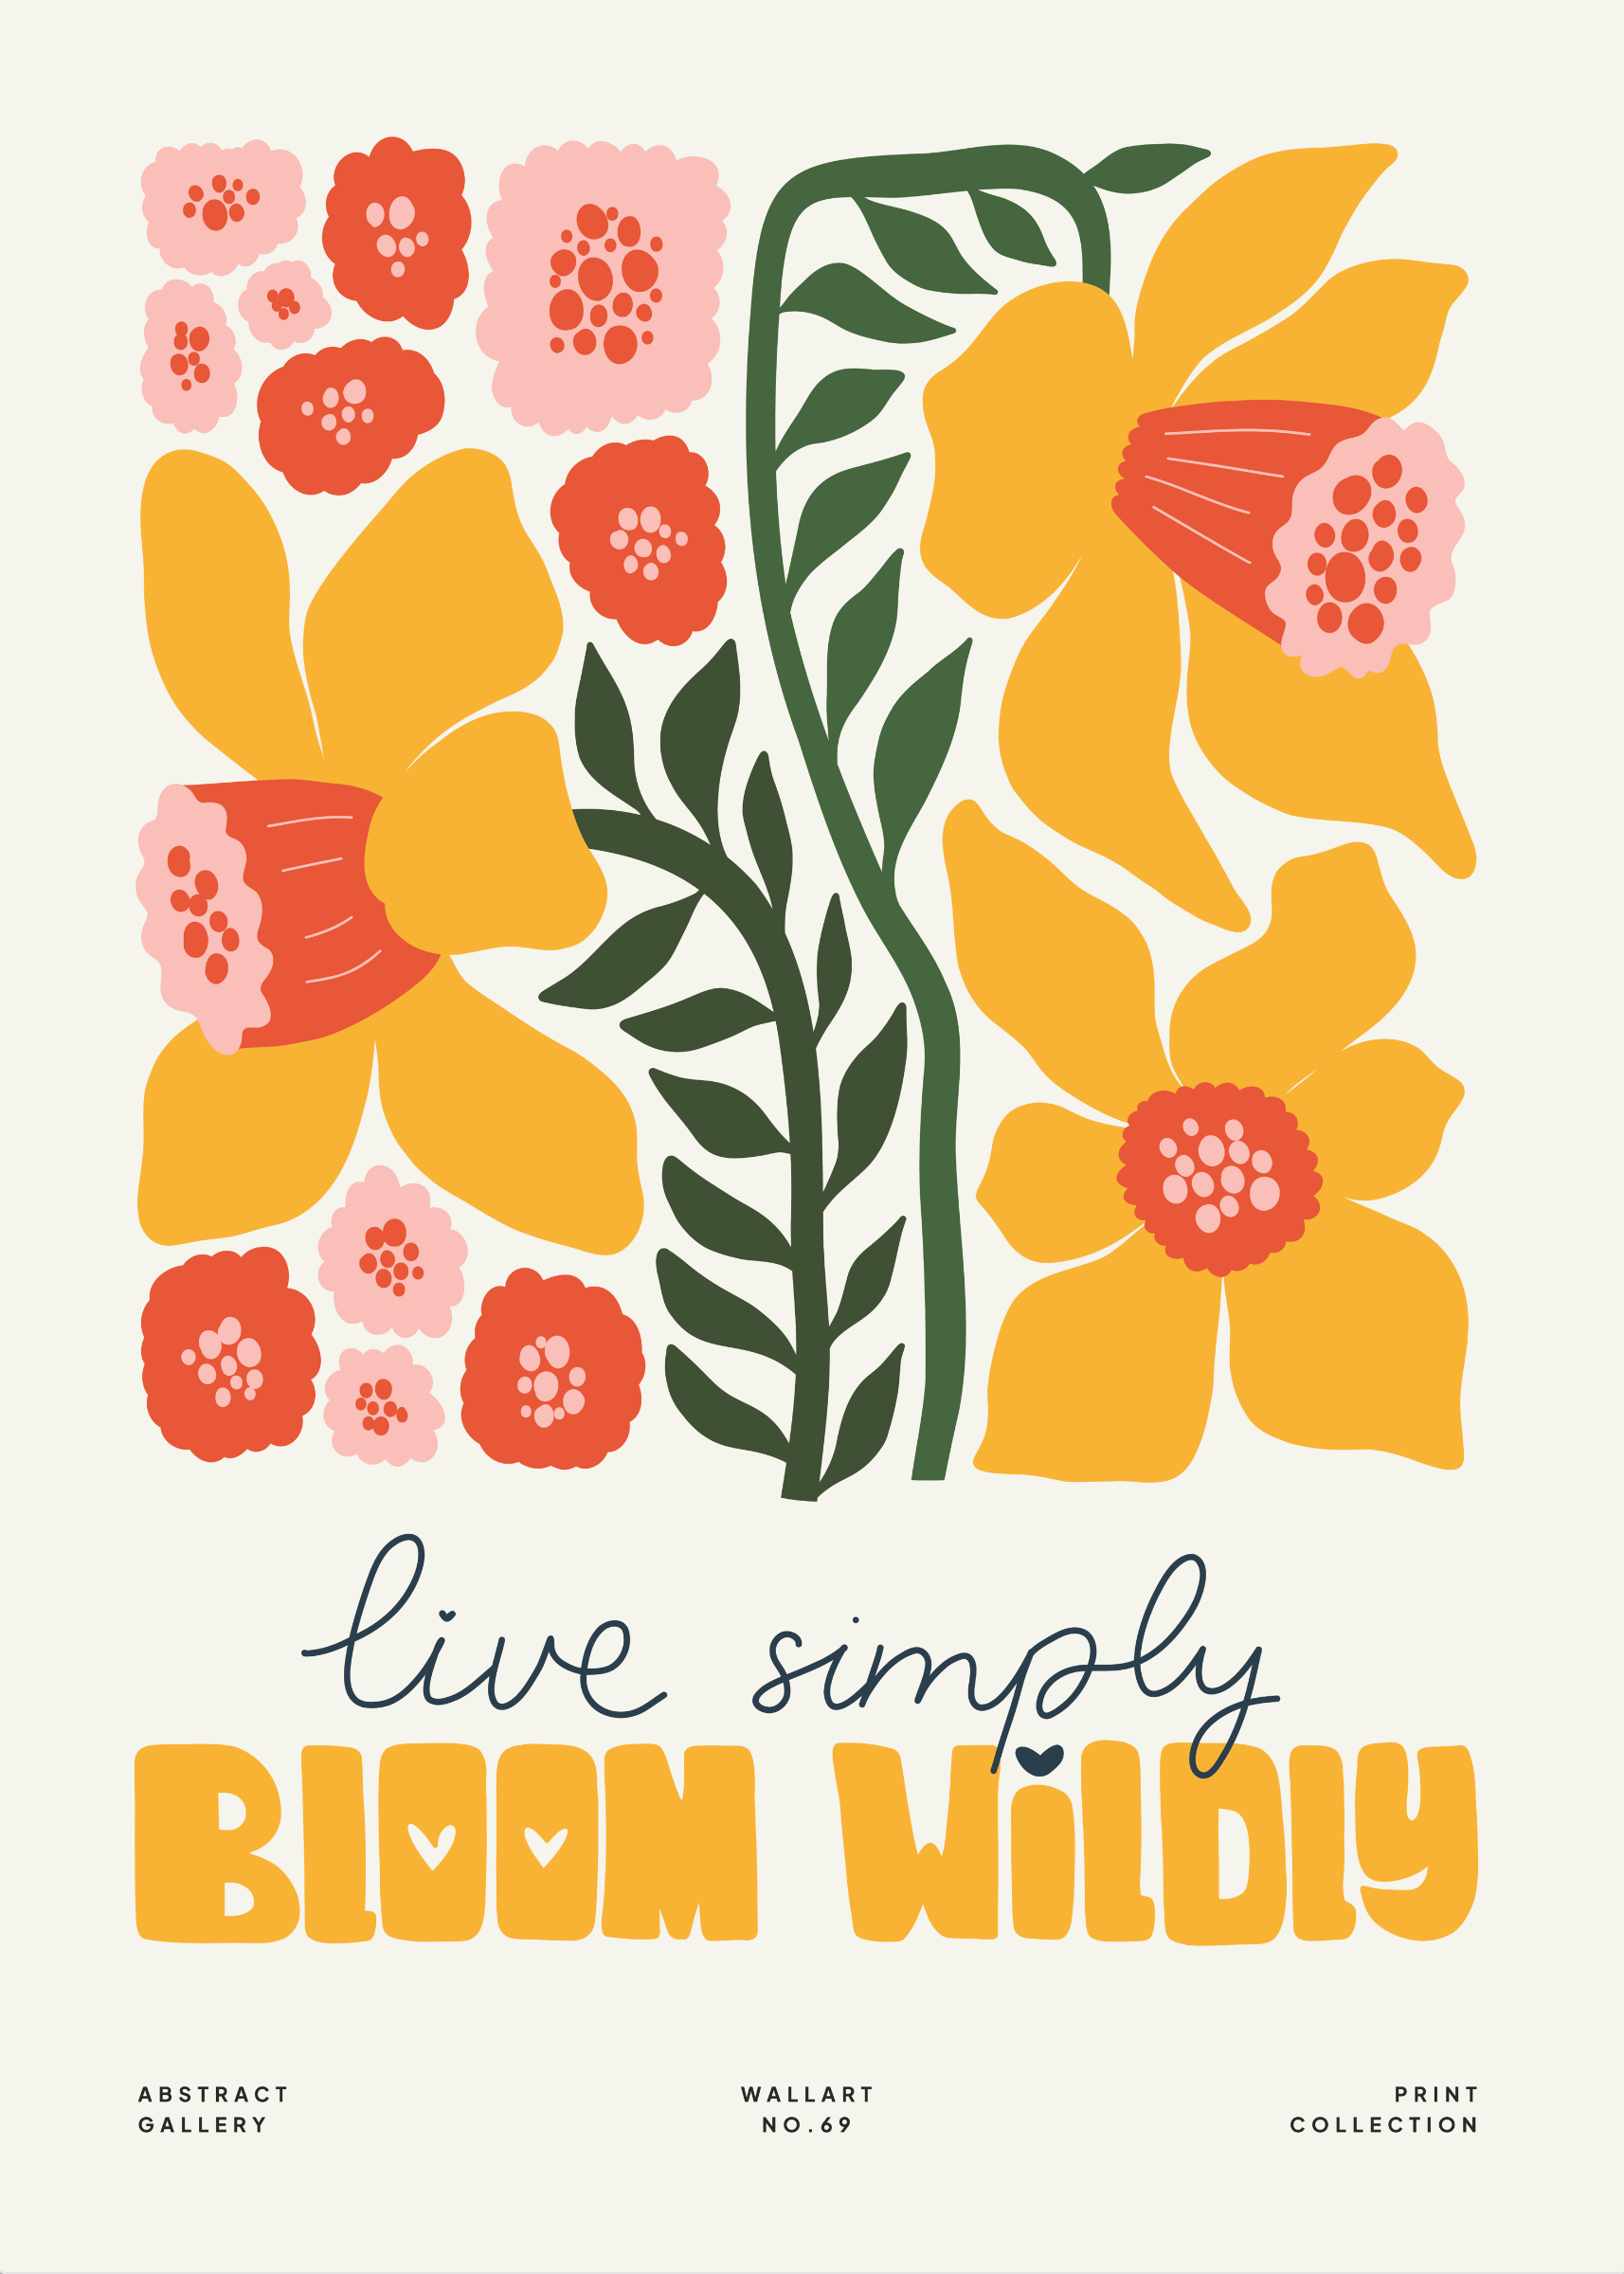 Abstract Gallery - Bloom wildly